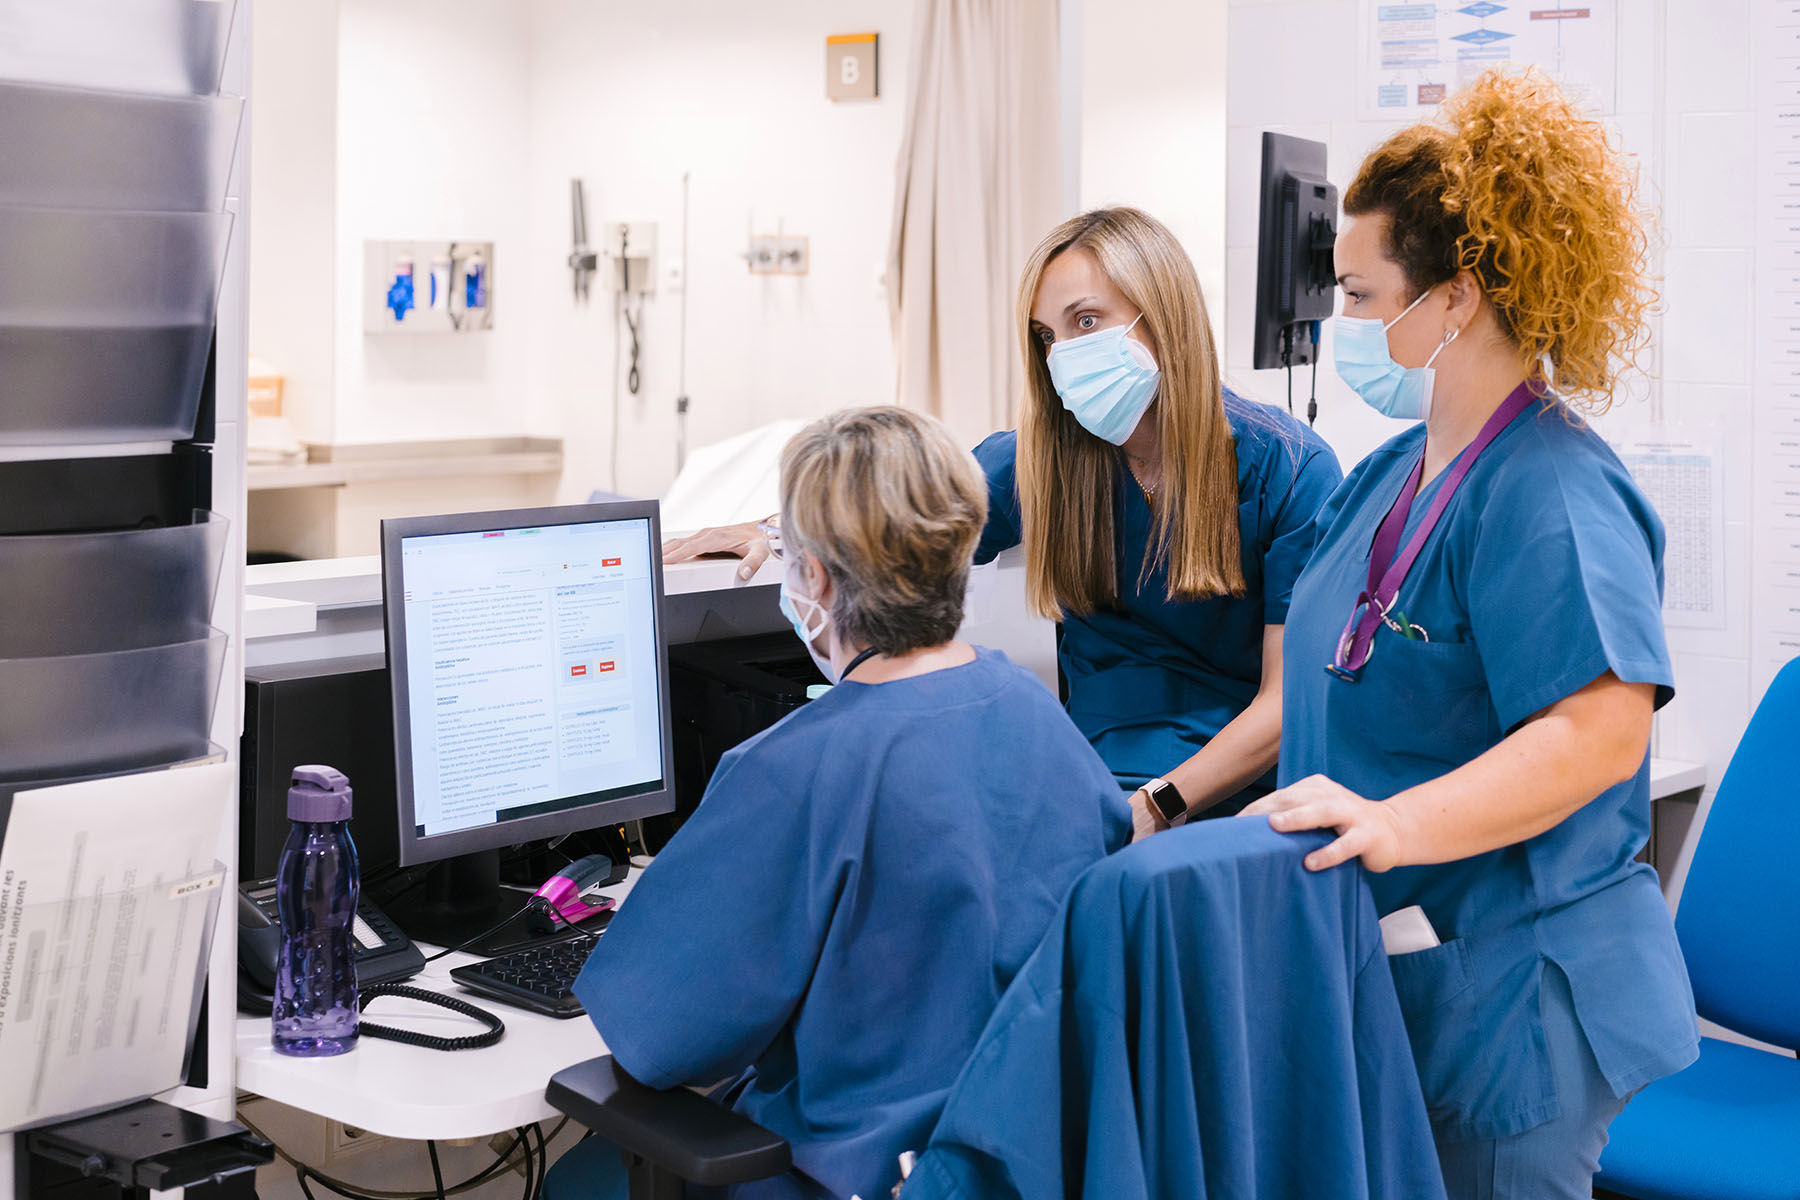 Nurses wearing protective face mask having discussion at around a computer.